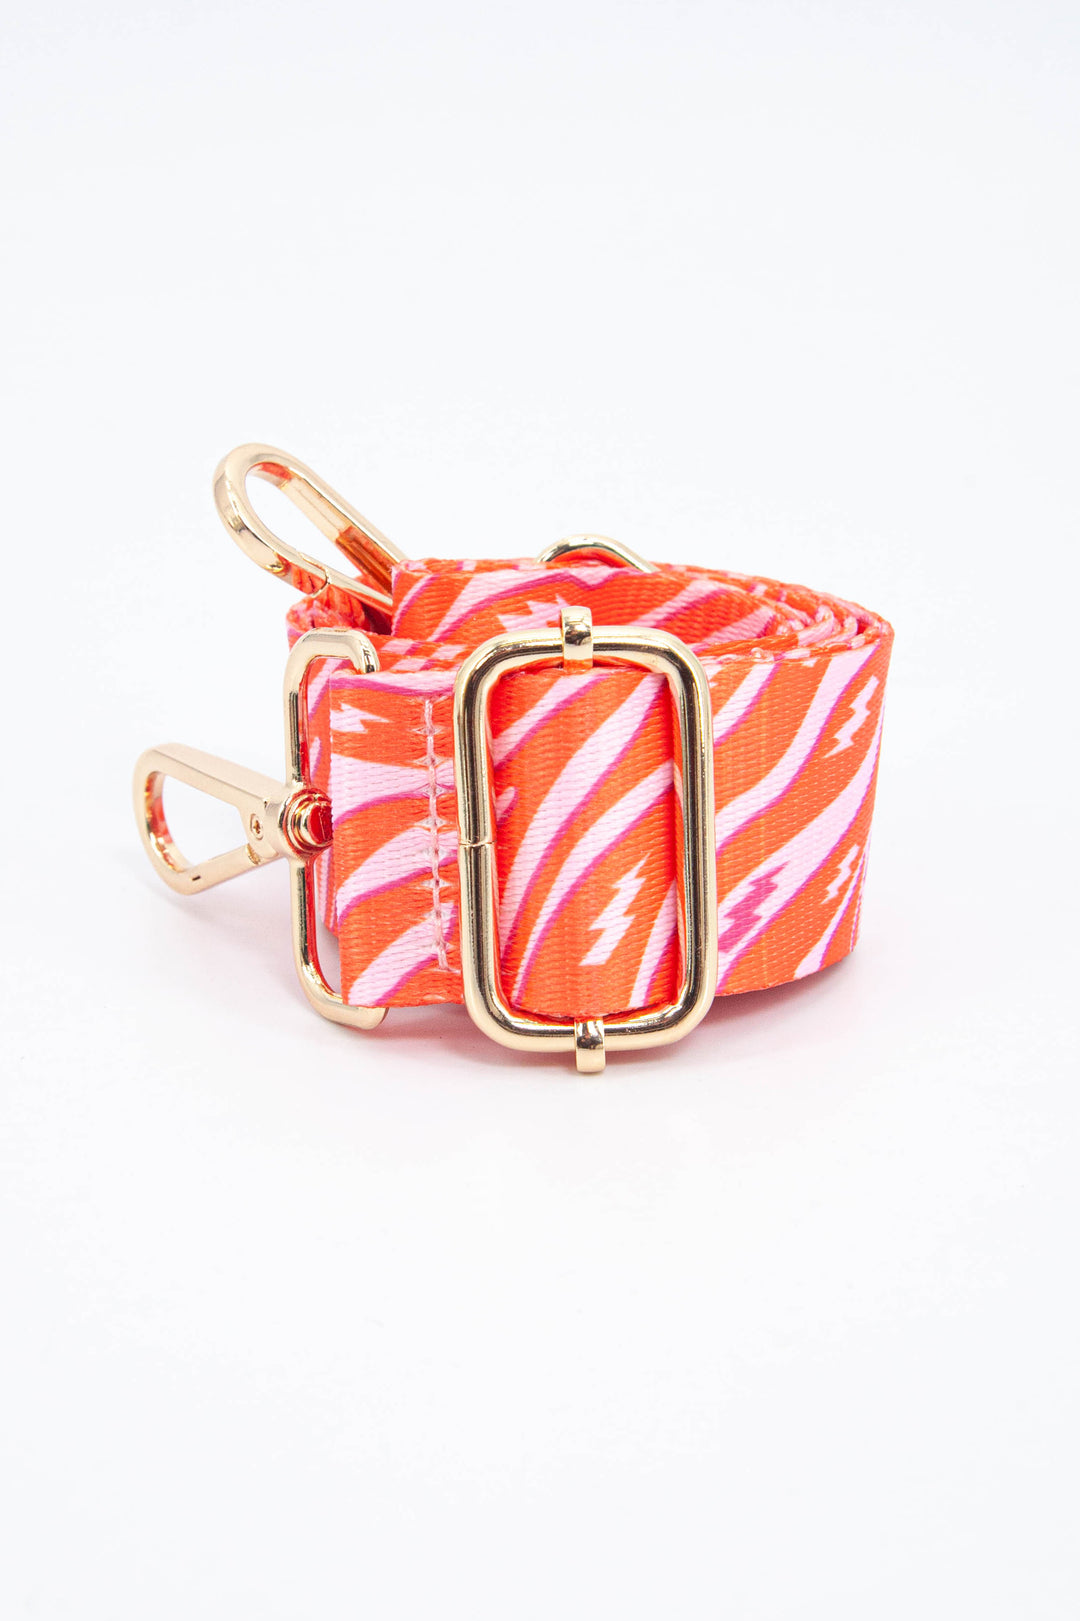 close up of the orange and pink zebra and lightning bolt pattern and adjustable gold buckle 